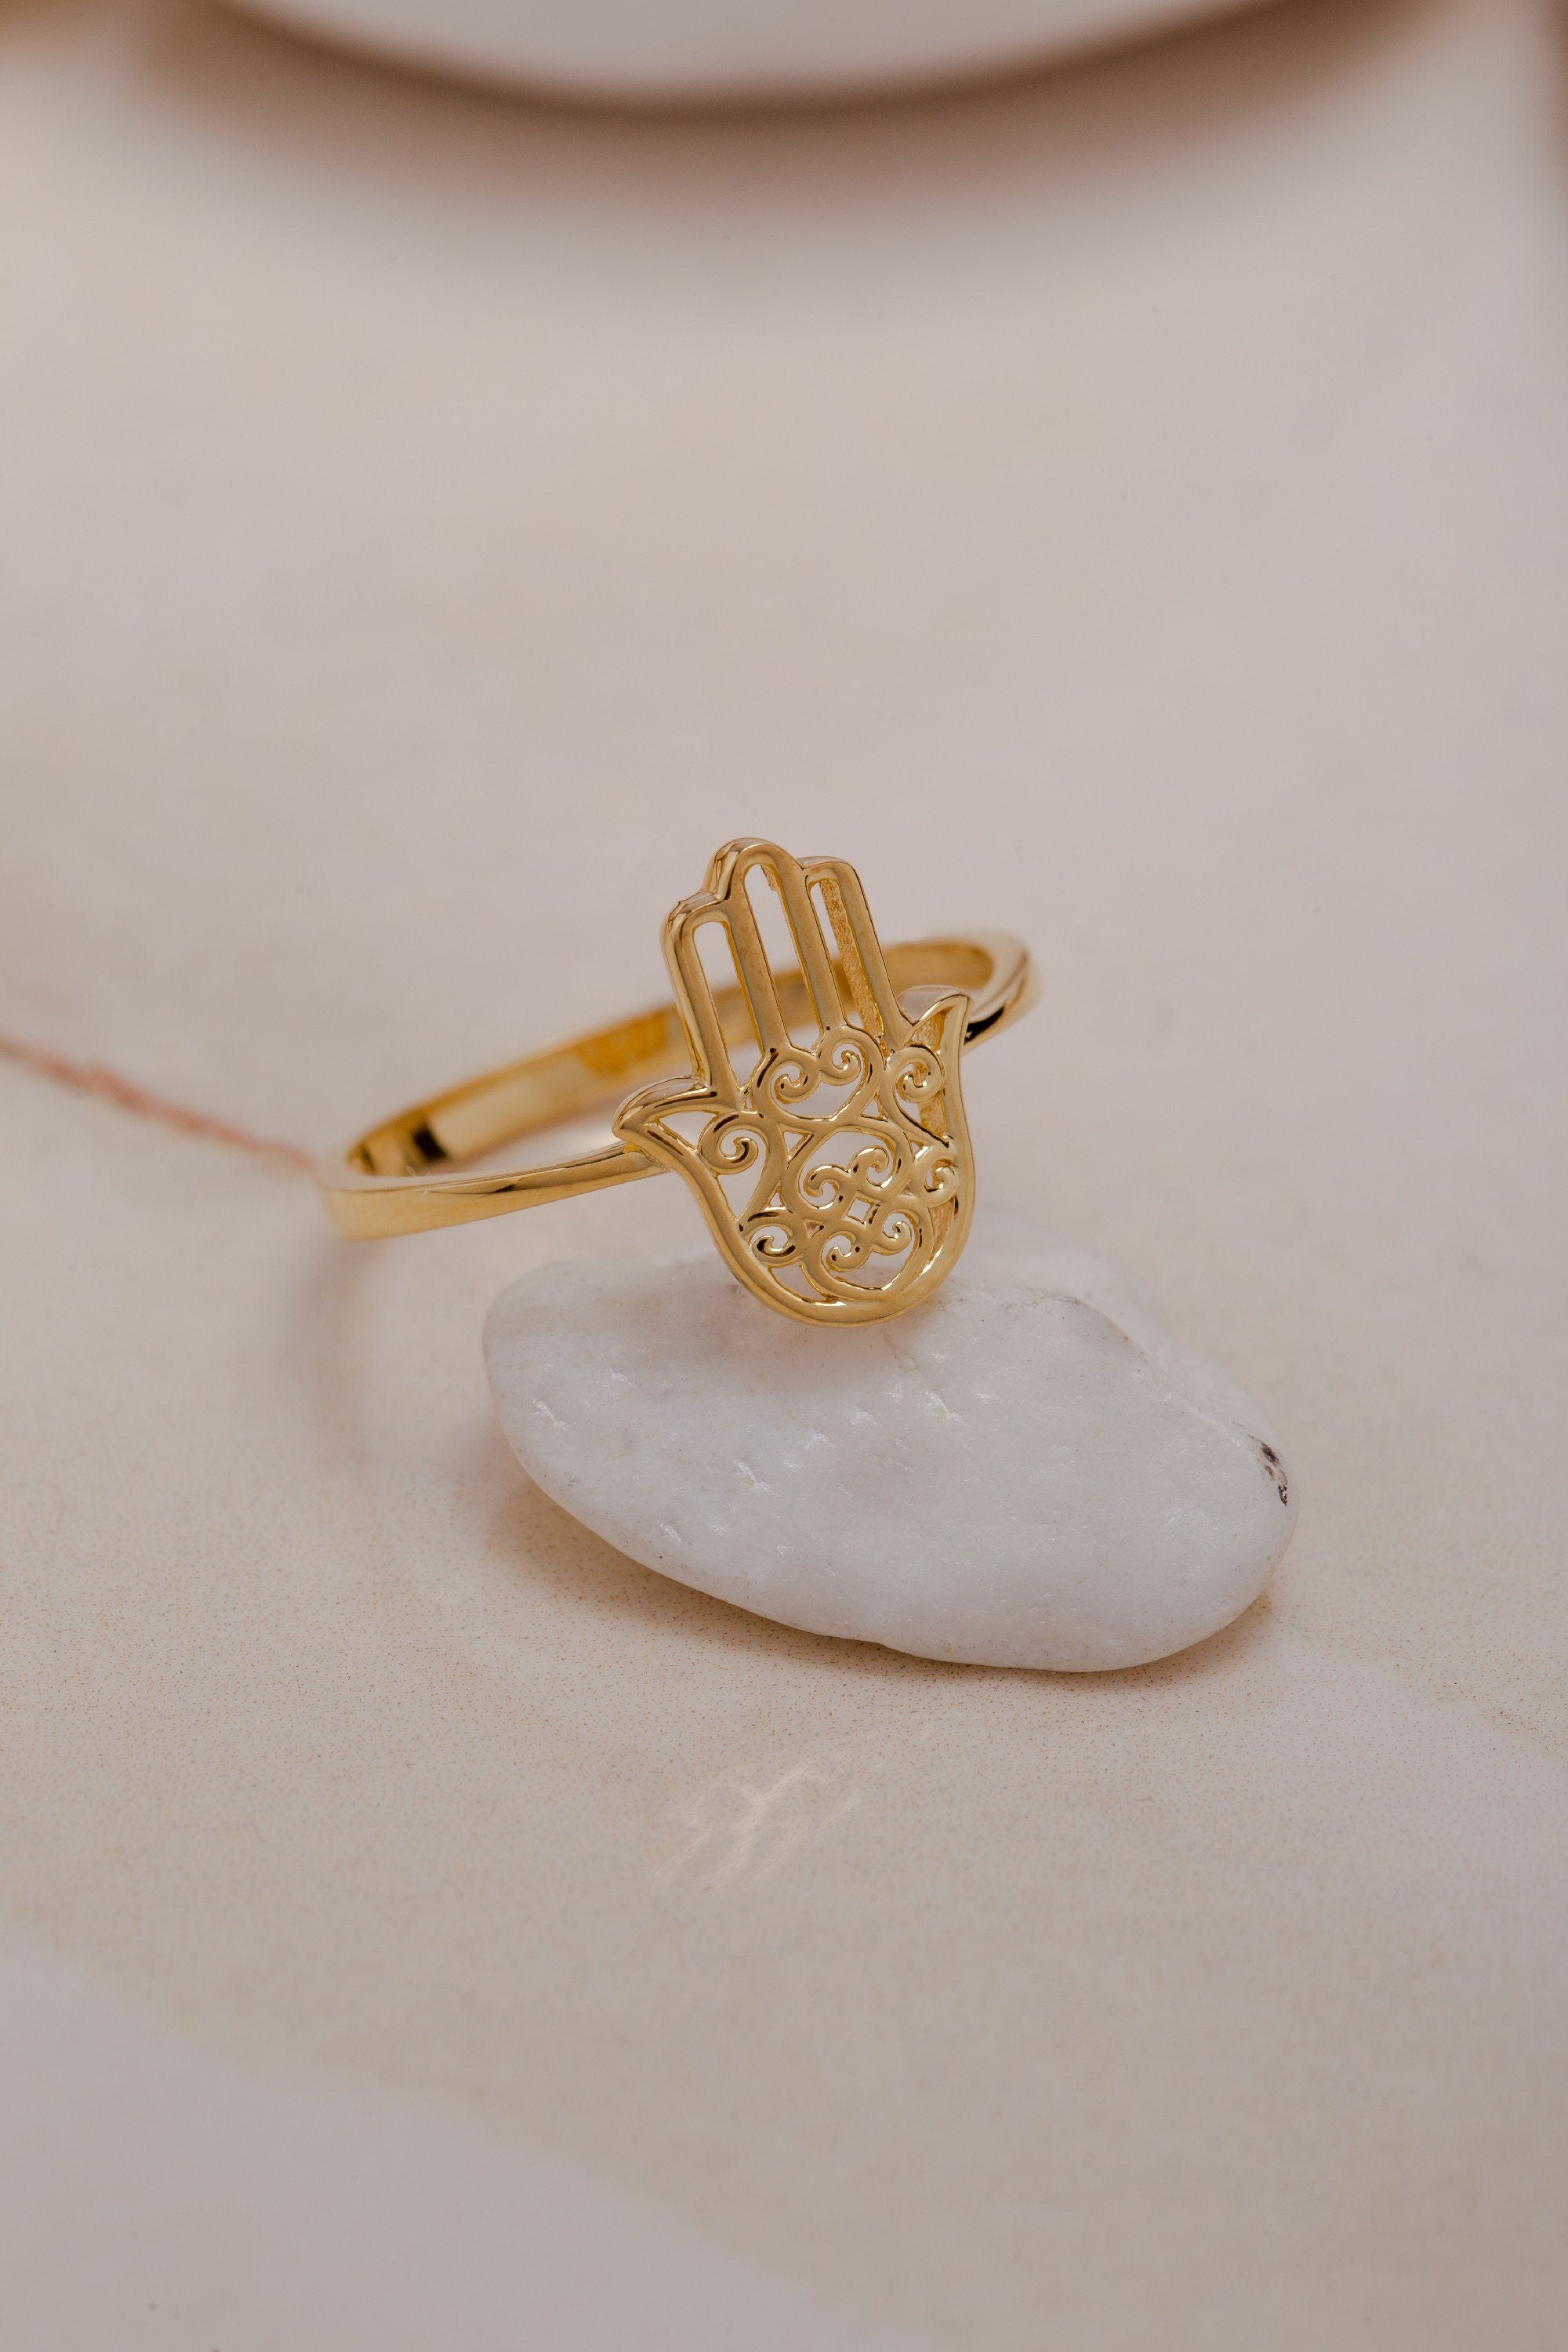 Minimal 18K Hamsa Hand Ring, Protection Ring, Elegant Ring, 18K Gold Hamsa Hand Ring, Gift For Mother Day, Mother Day Jewelry